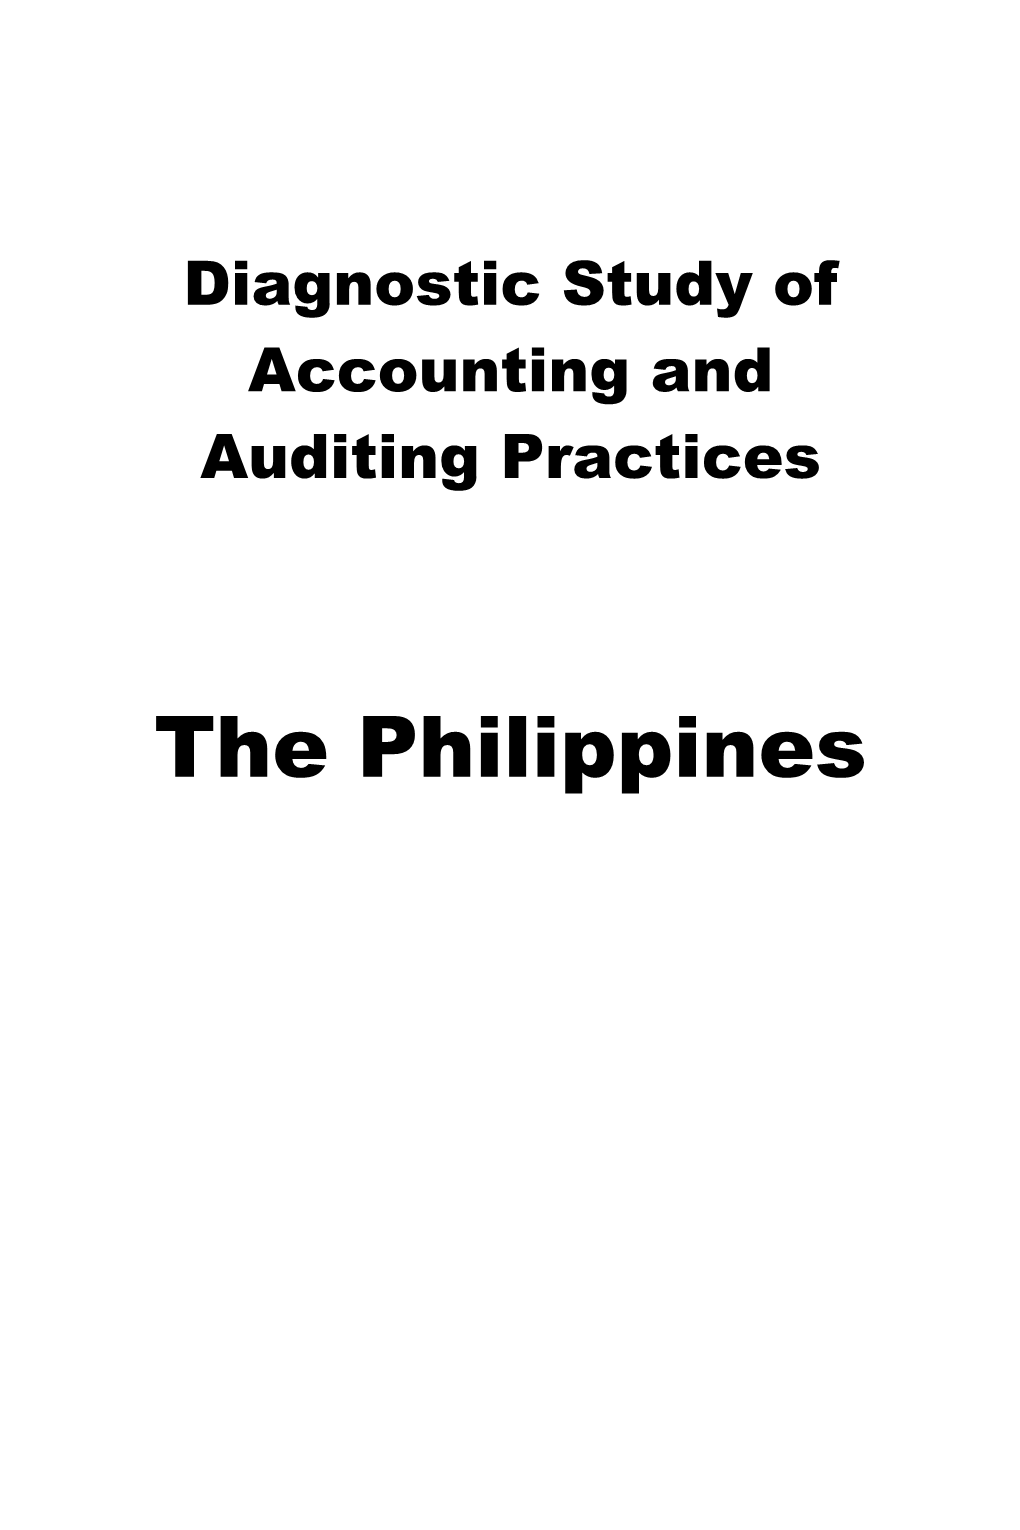 Diagnostic Study of Accounting and Auditing Practices in the Philippines